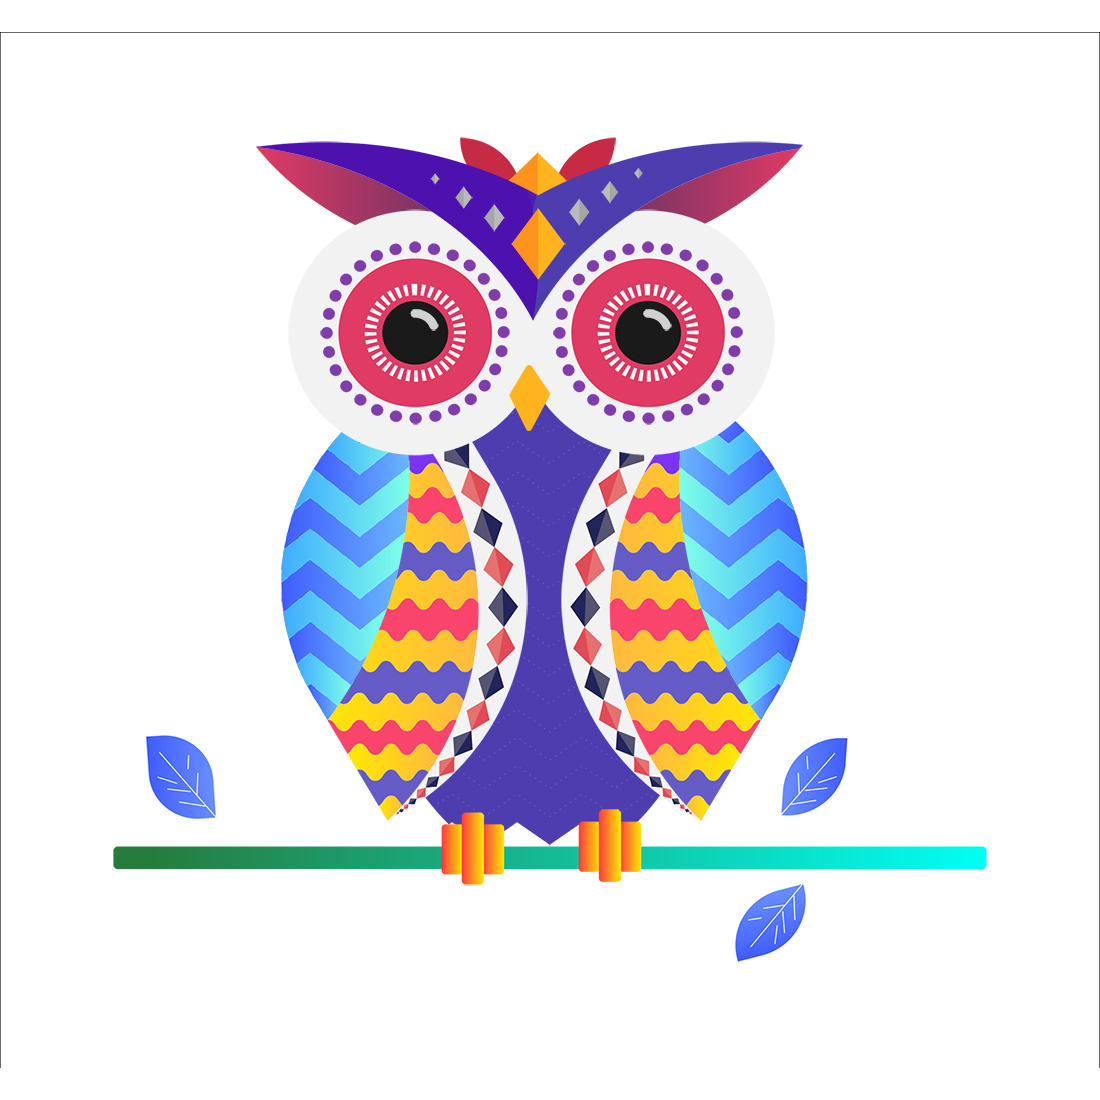 Majestic Owl Colorful Stylized Illustration just in 15$ cover image.